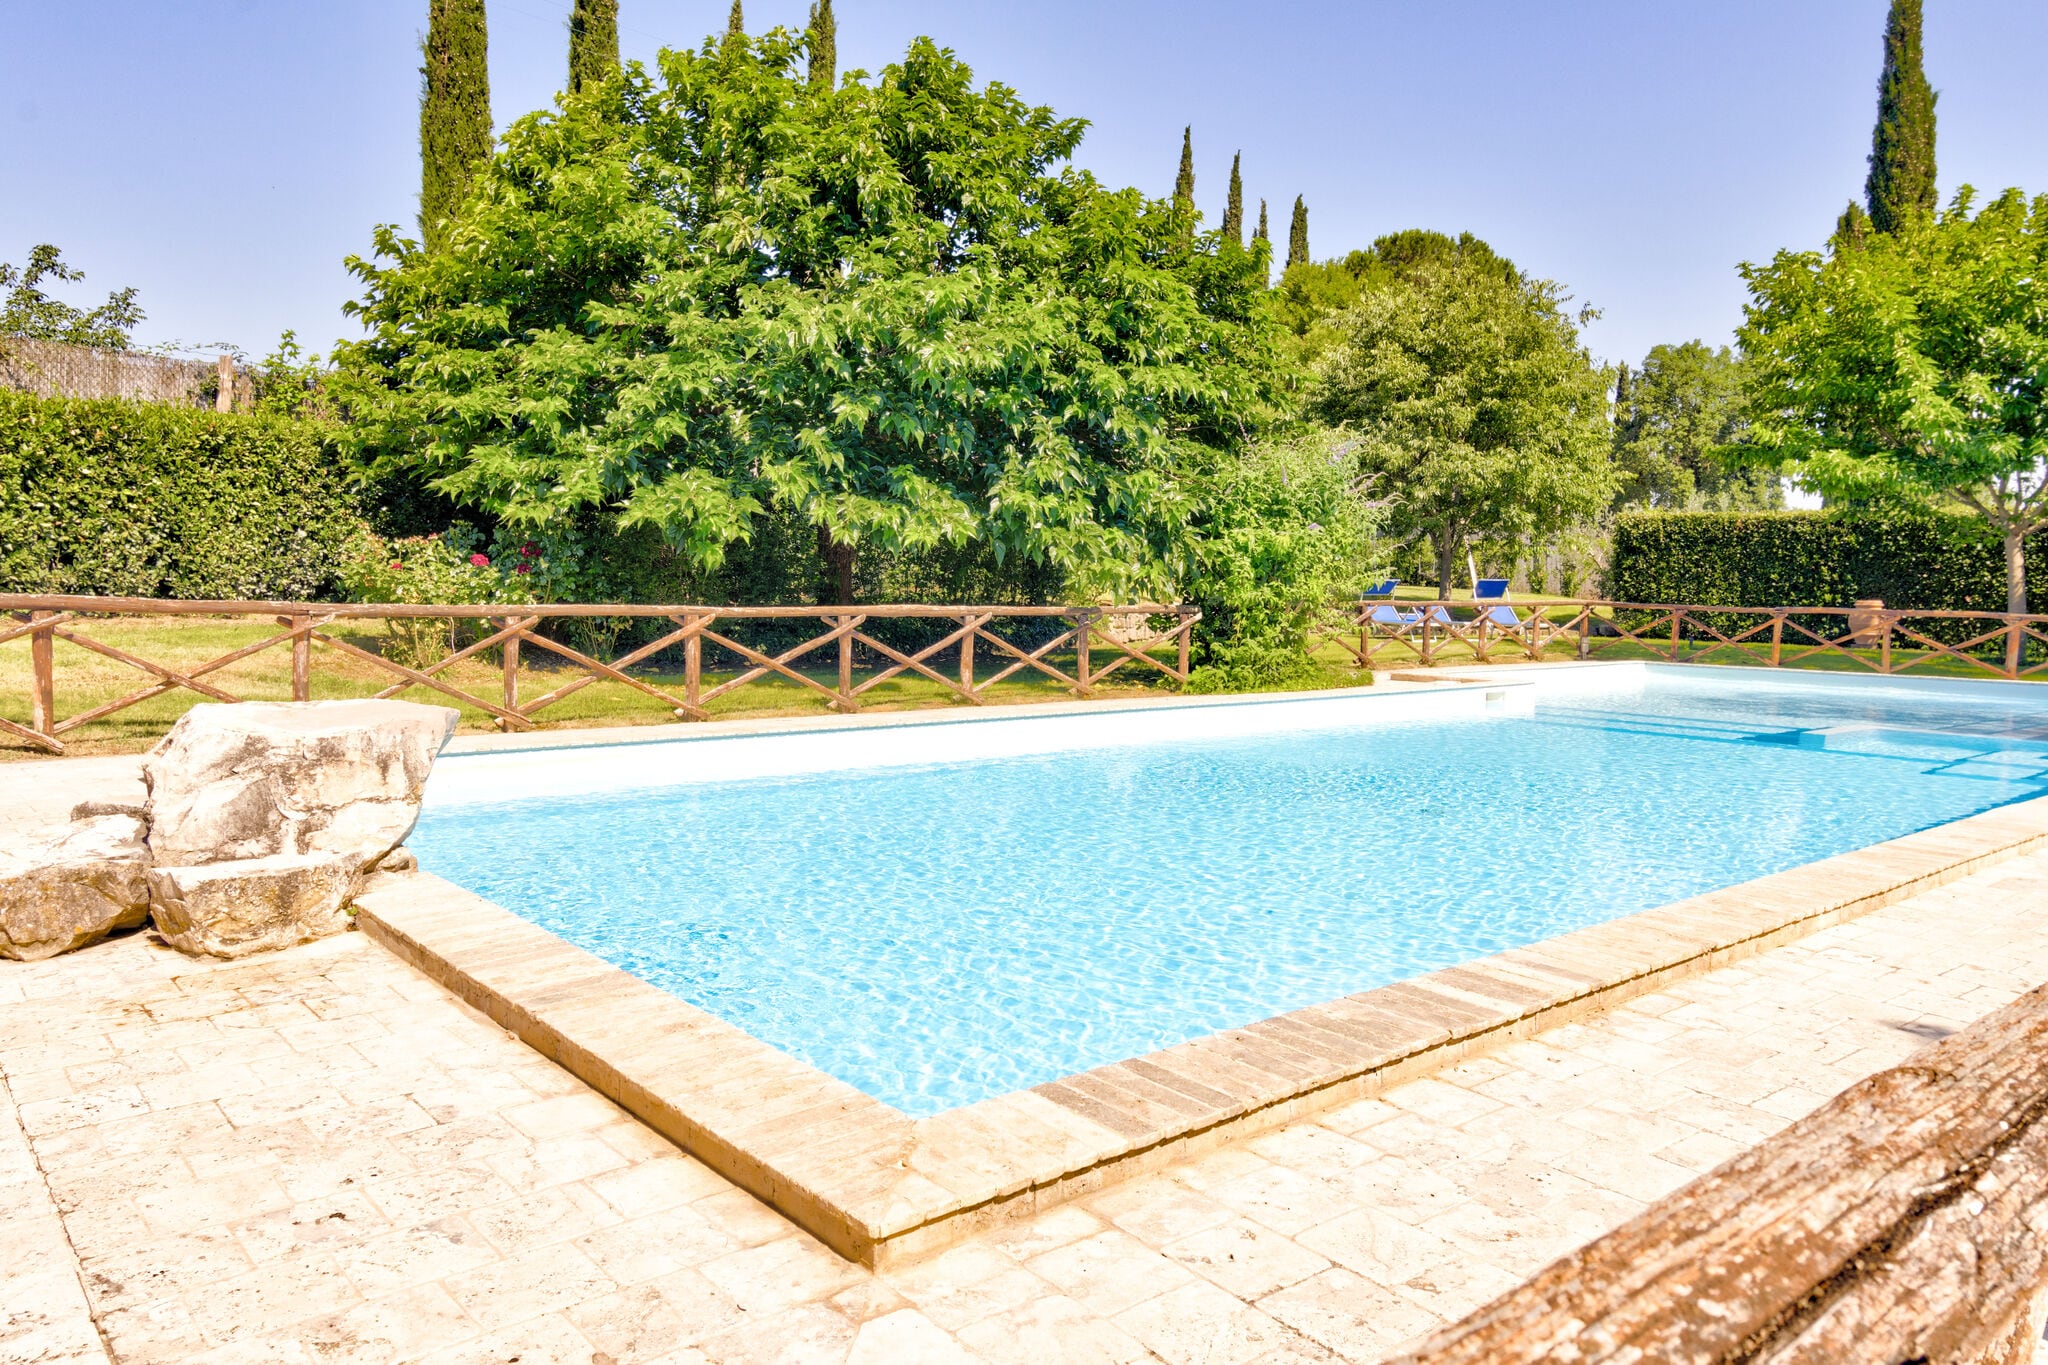 Agriturismo with swimming pool, quiet valley, mountain bikes available